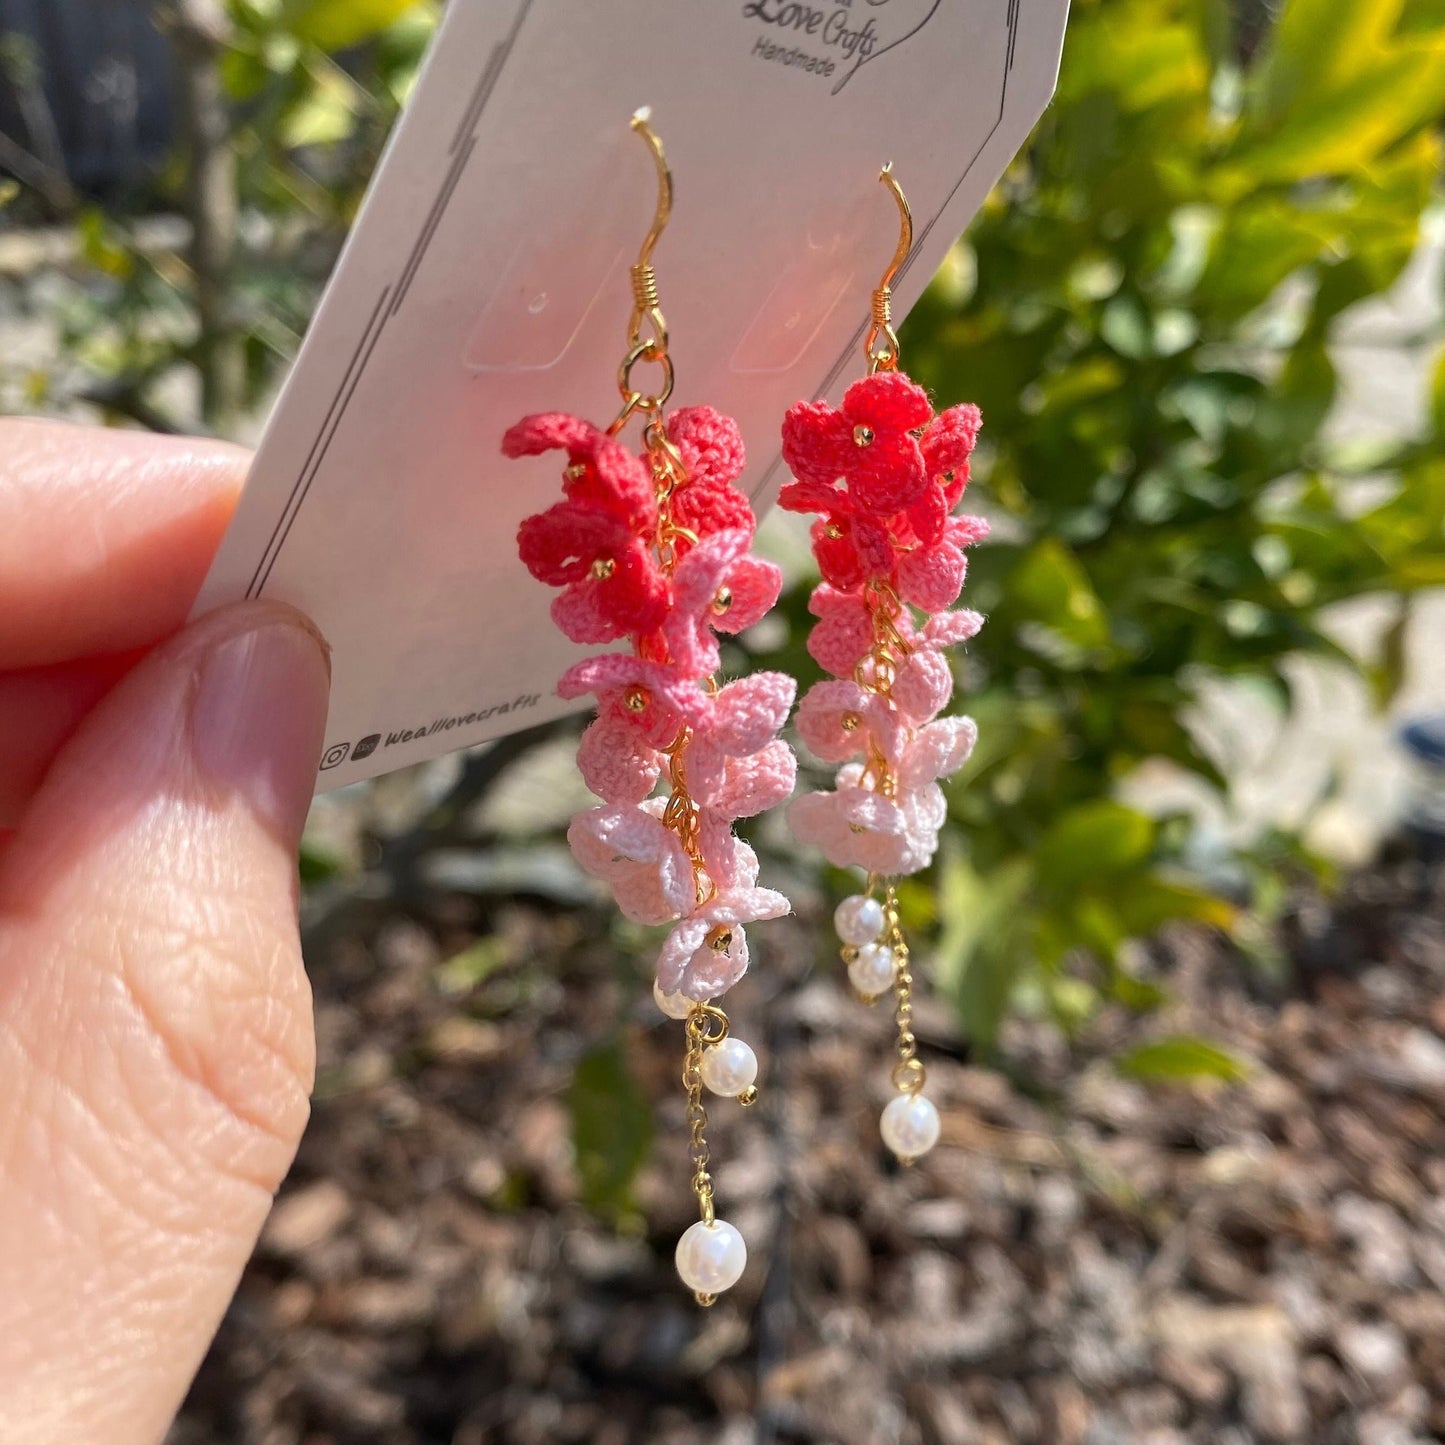 Load image into Gallery viewer, 4 shades of Coral Red ombre flower cluster crochet dangle earrings/Microcrochet/14k gold/gift for her/Knitting handmade jewelry
